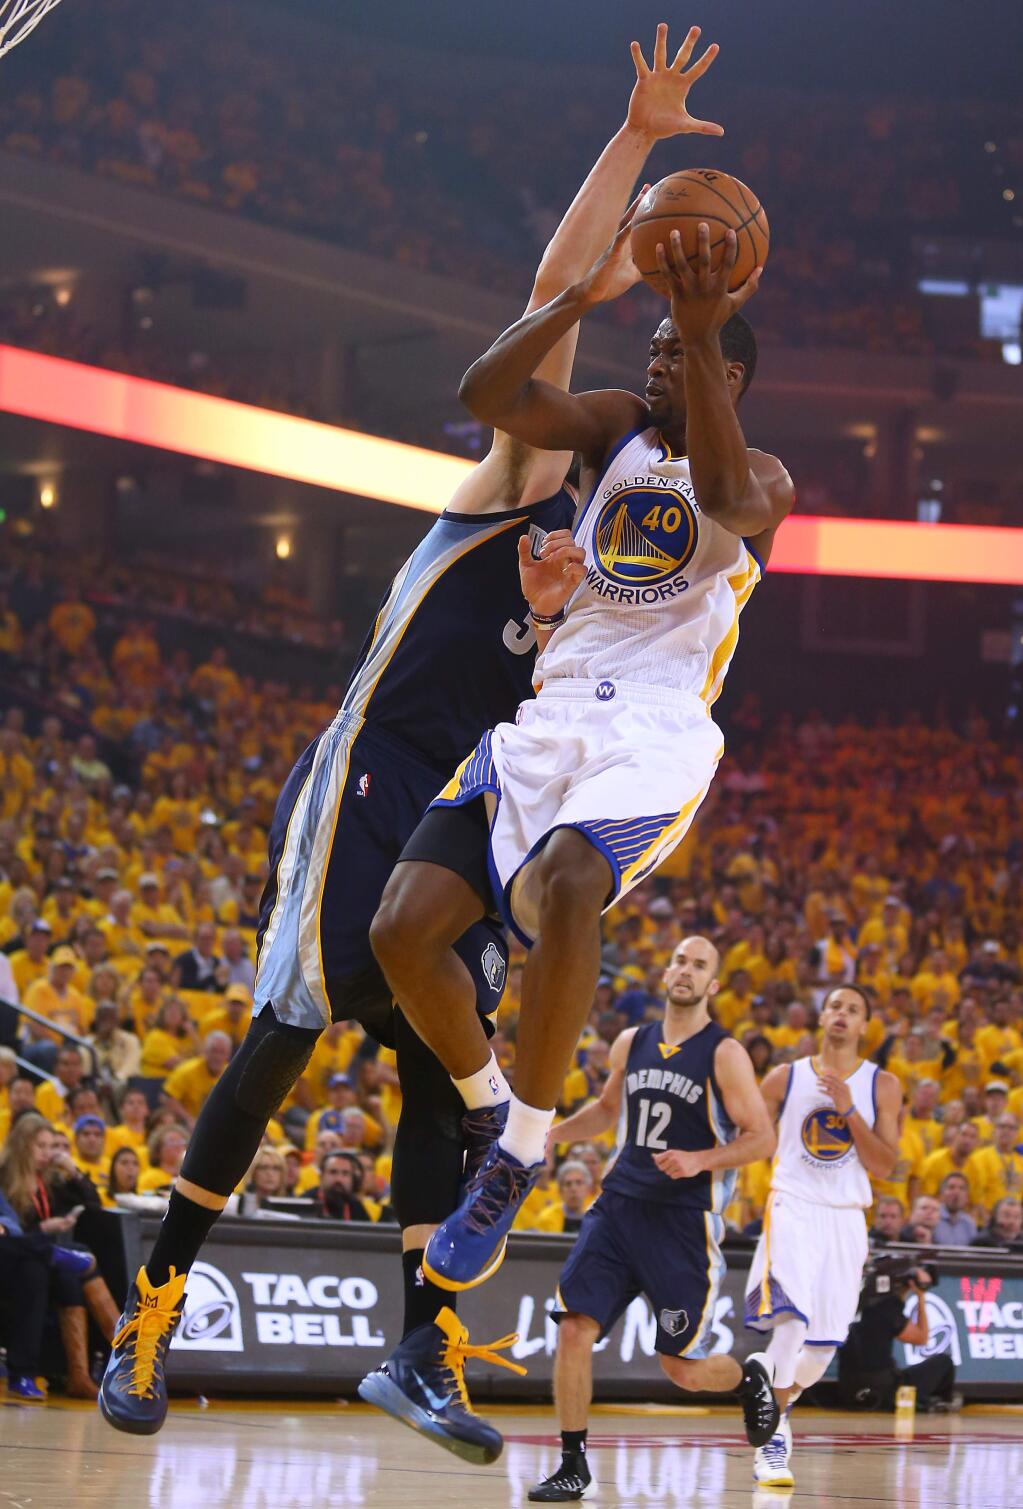 Golden State Warriors forward Harrison Barnes goes up for a shot against Memphis Grizzlies center Marc Gasol during Game 1 of the NBA Playoffs Western Conference Semifinals at Oracle Arena, in Oakland on Sunday, May 3, 2015. (Christopher Chung/ The Press Democrat)